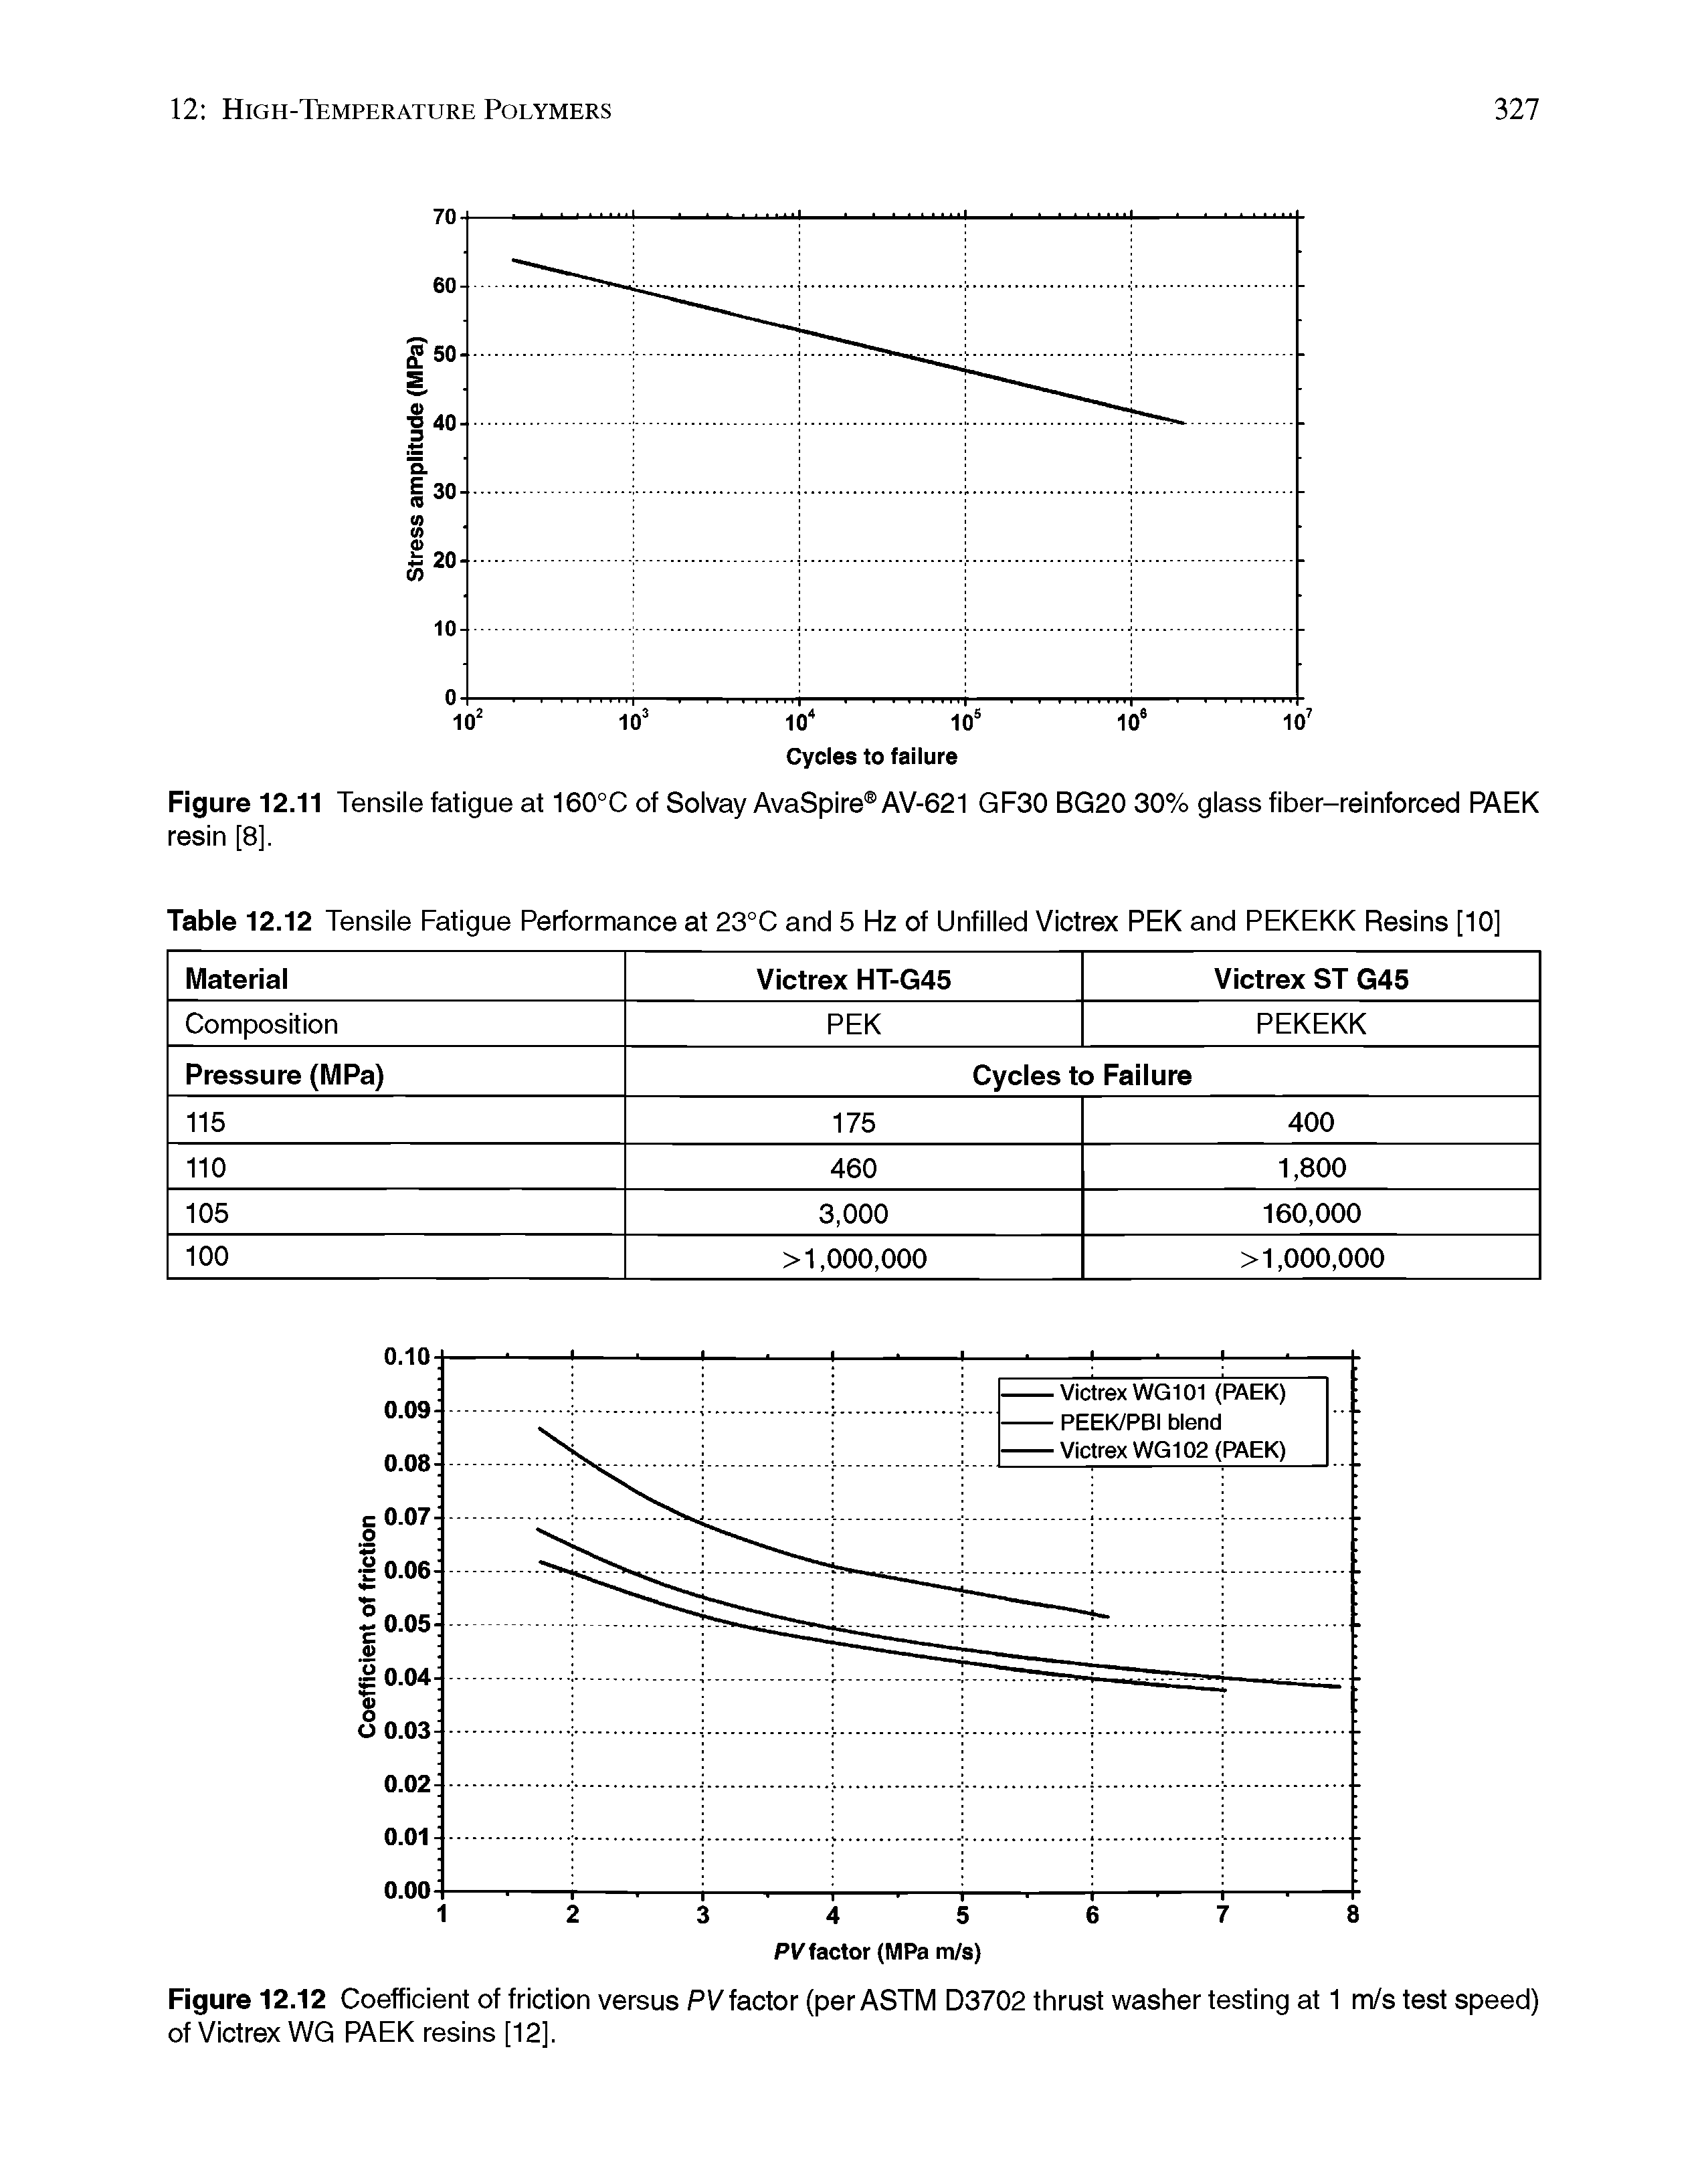 Figure 12.12 Coefficient of friction versus PVfactor (per ASTM D3702 thrust washer testing at 1 m/s test speed) of Victrex WG PAEK resins [12].